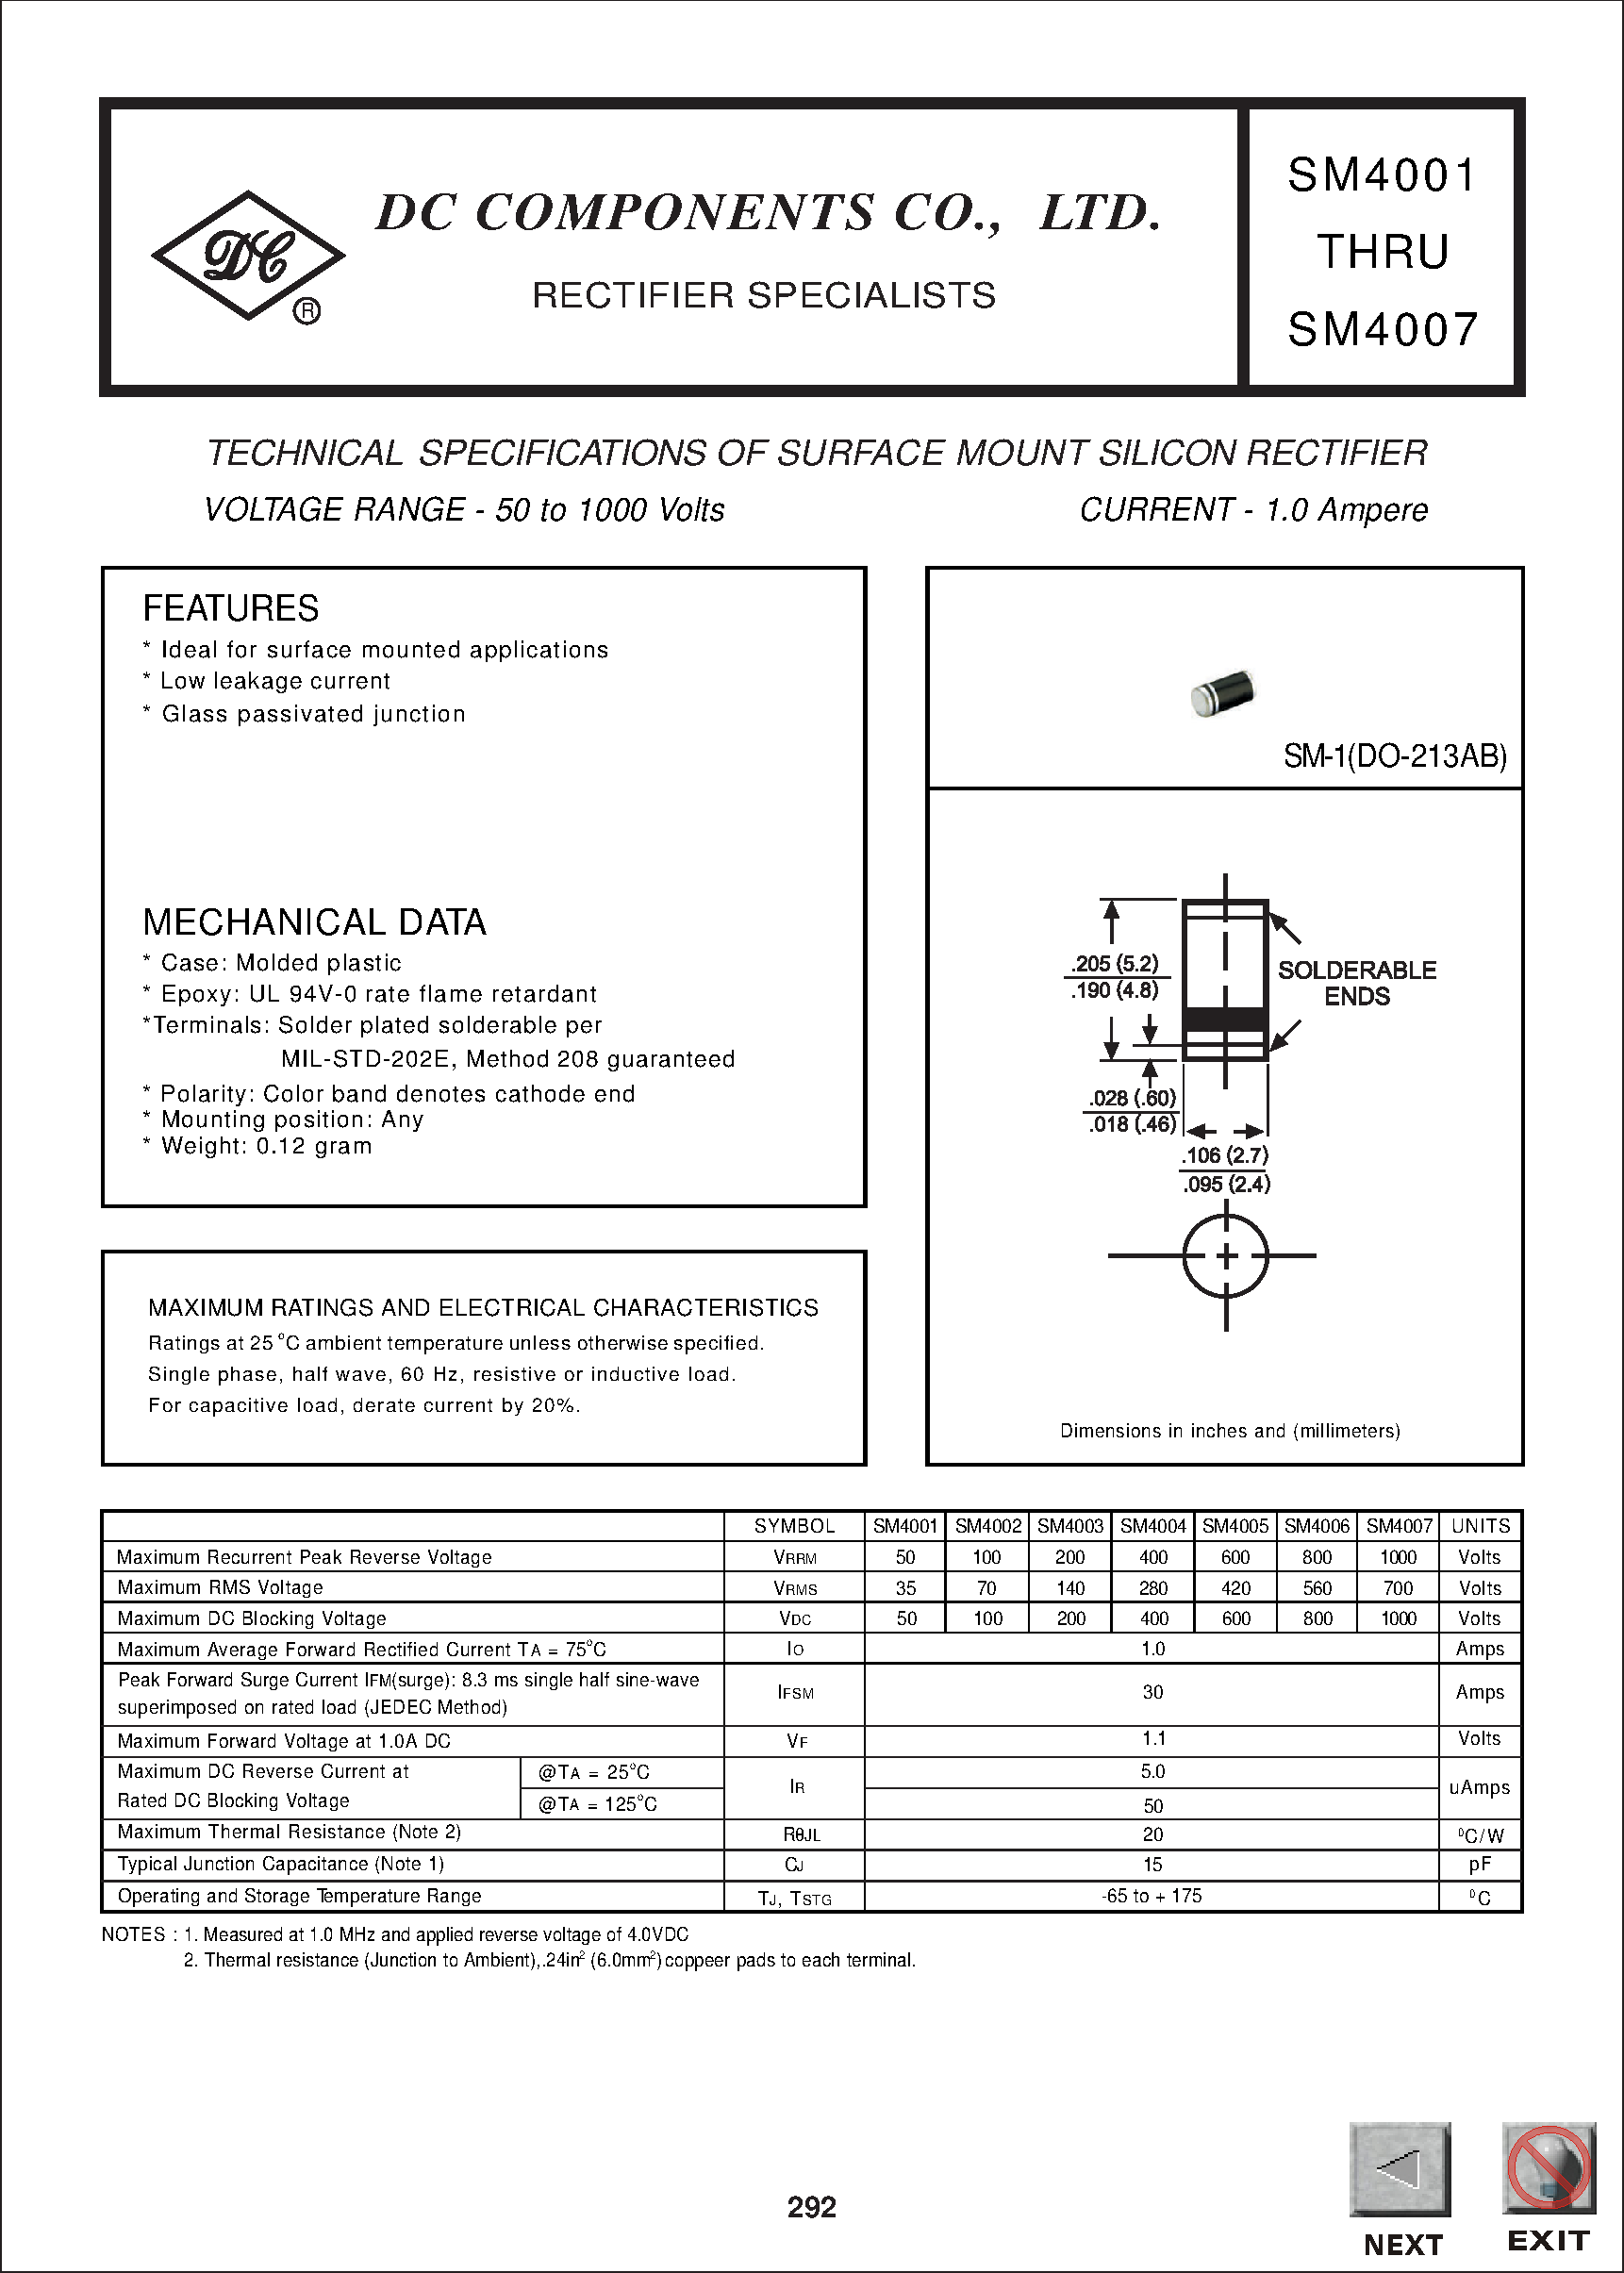 Datasheet SM4002 - TECHNICAL SPECIFICATIONS OF SURFACE MOUNT SILICON RECTIFIER page 1